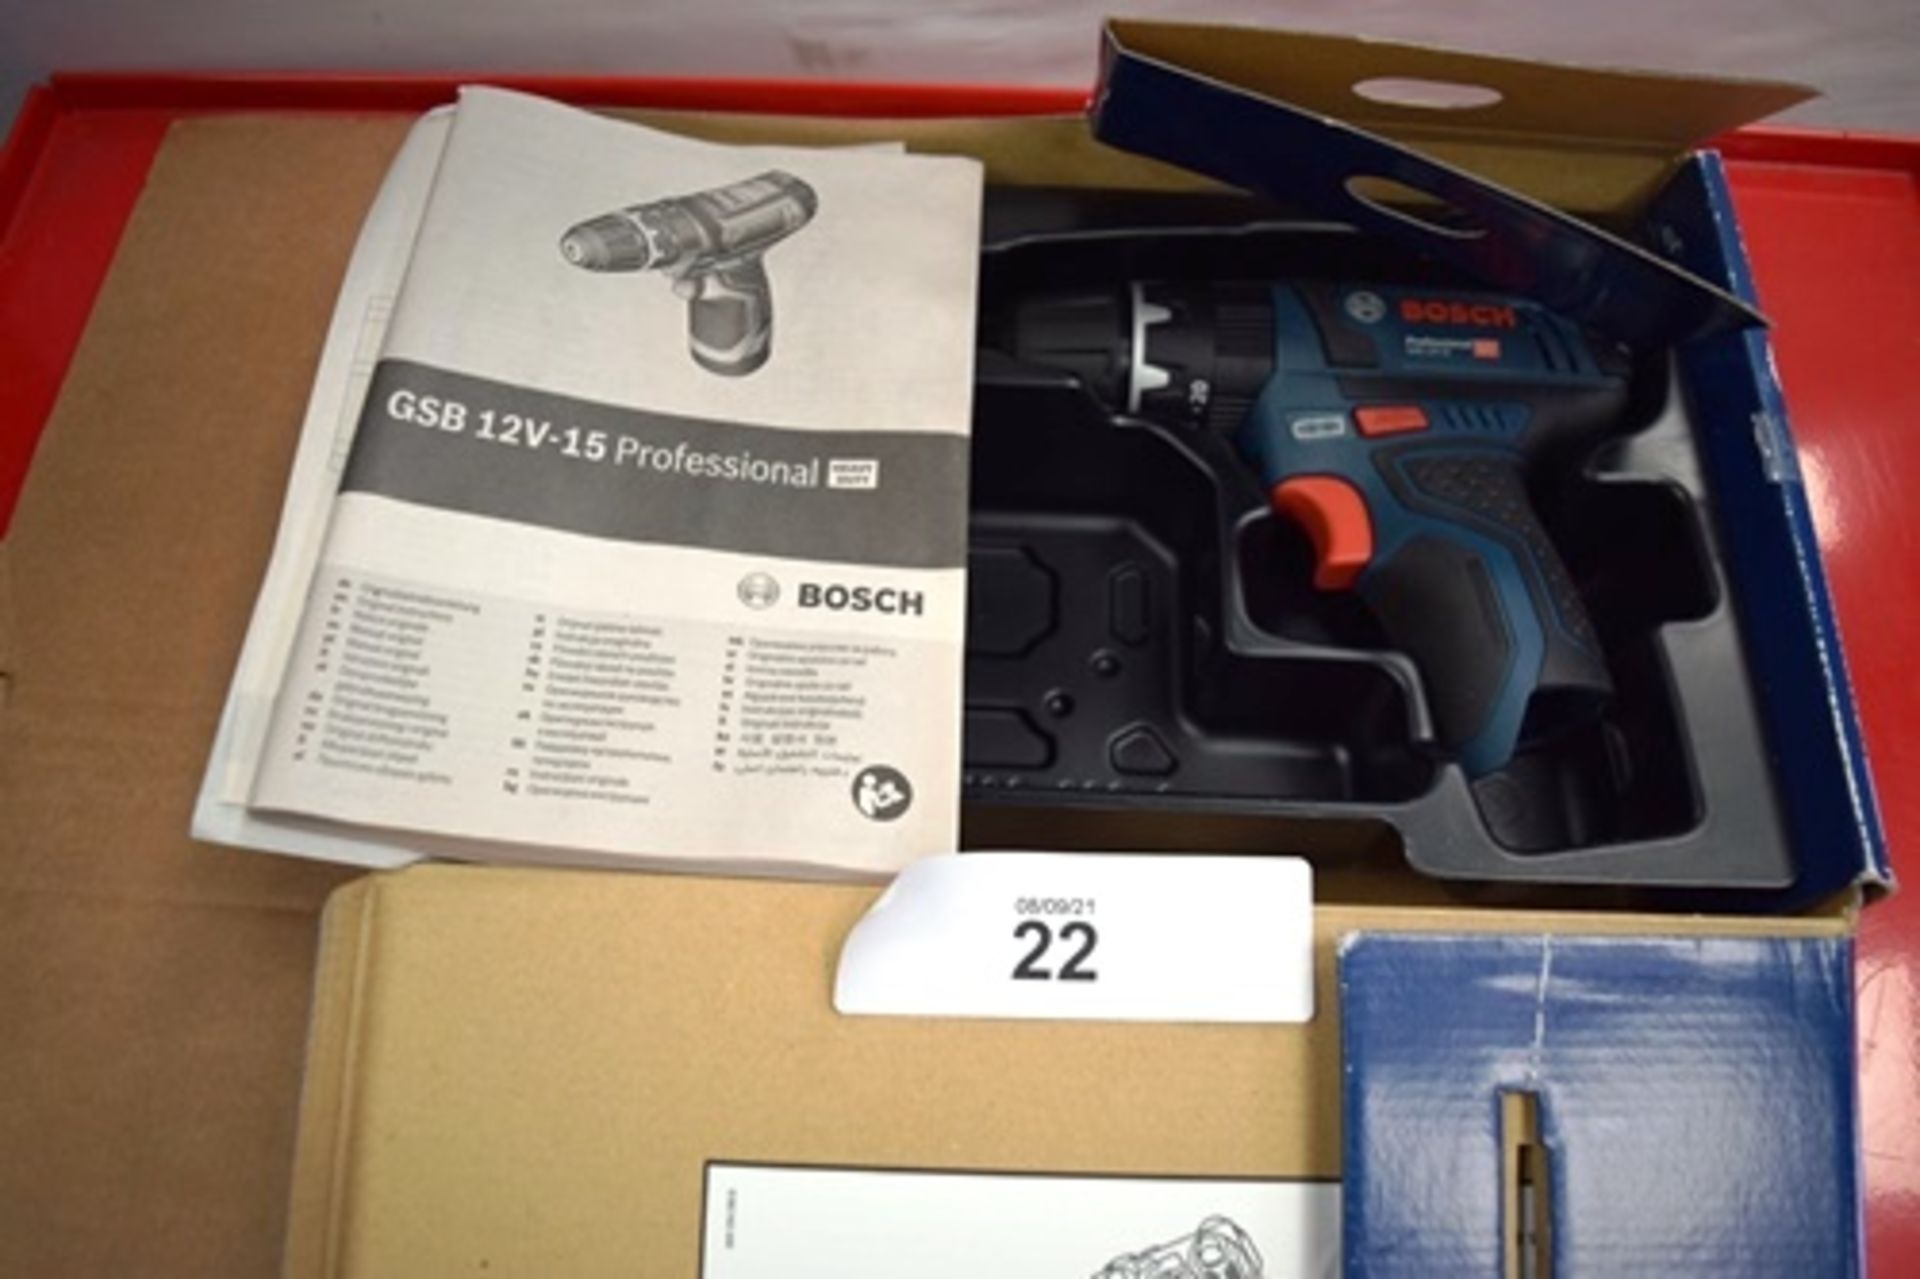 1 x Bosch 12V cordless impact drill/driver, model GSB 12V-15, body only, 1 x Bosch angle grinder, - Image 3 of 4